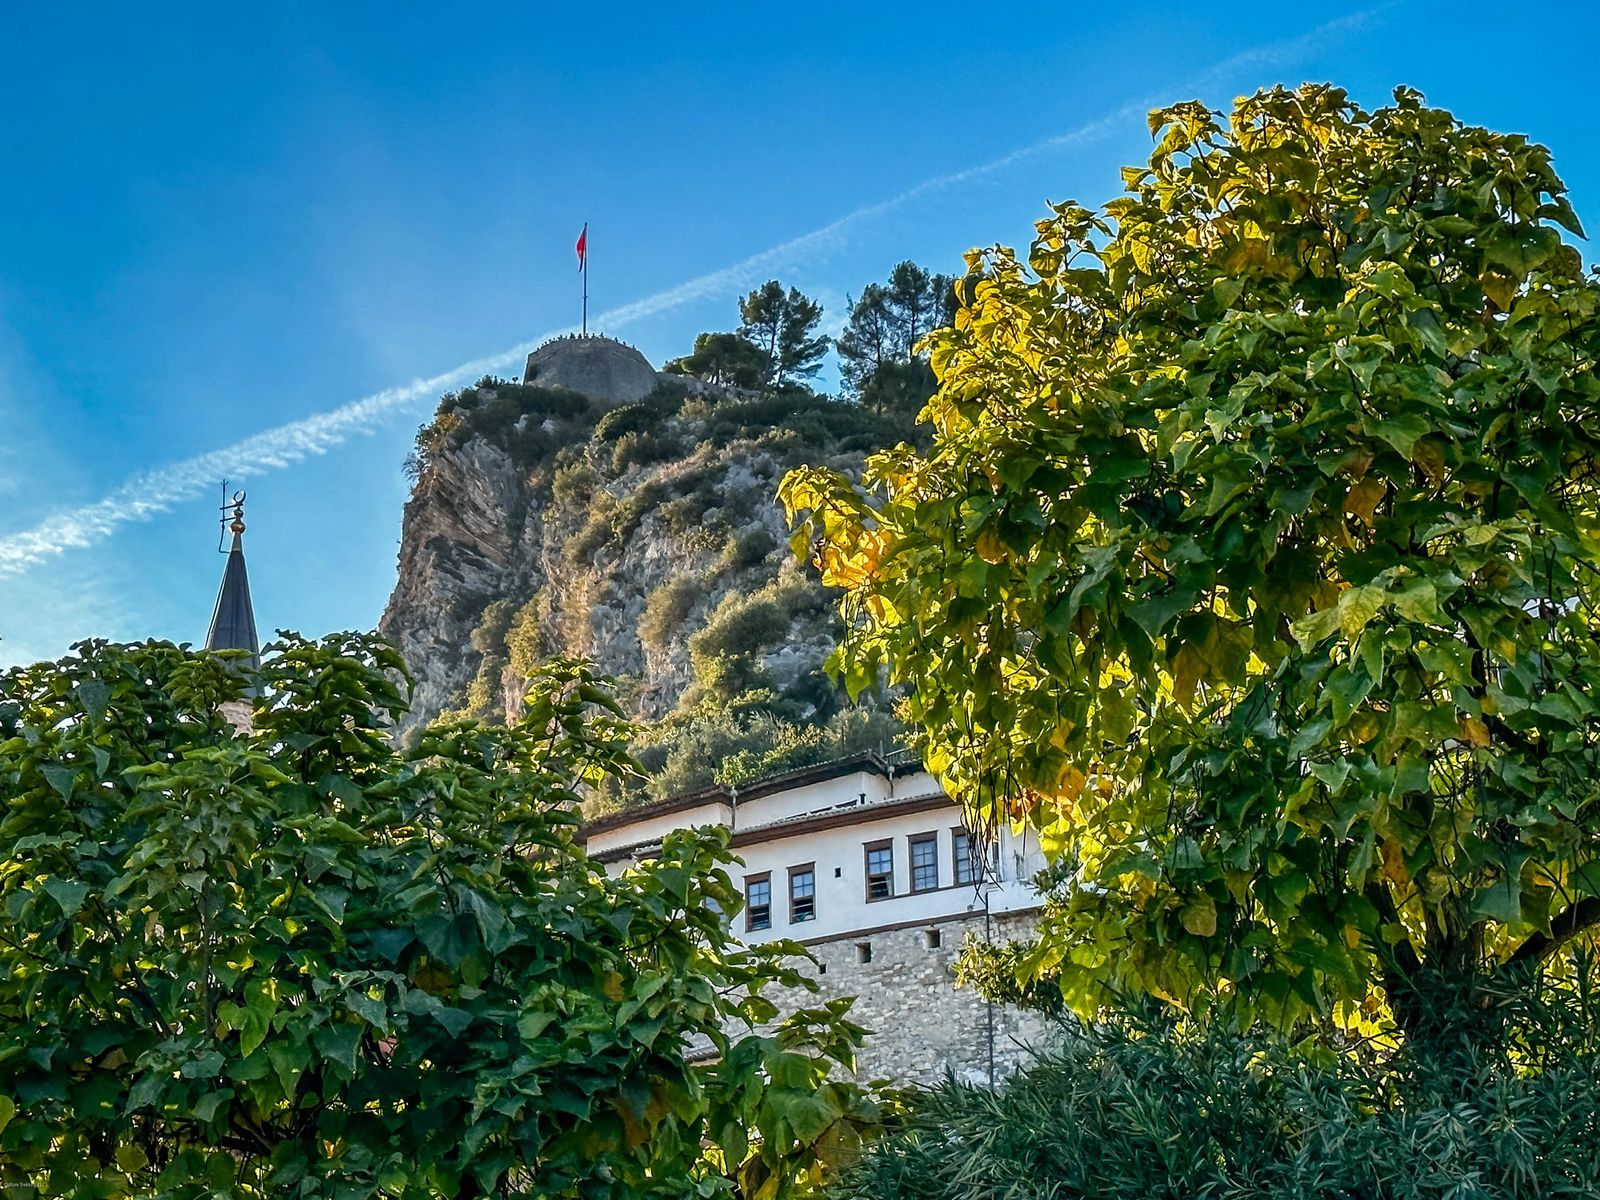 Berat Castle - Things to see in berat Albania in one day